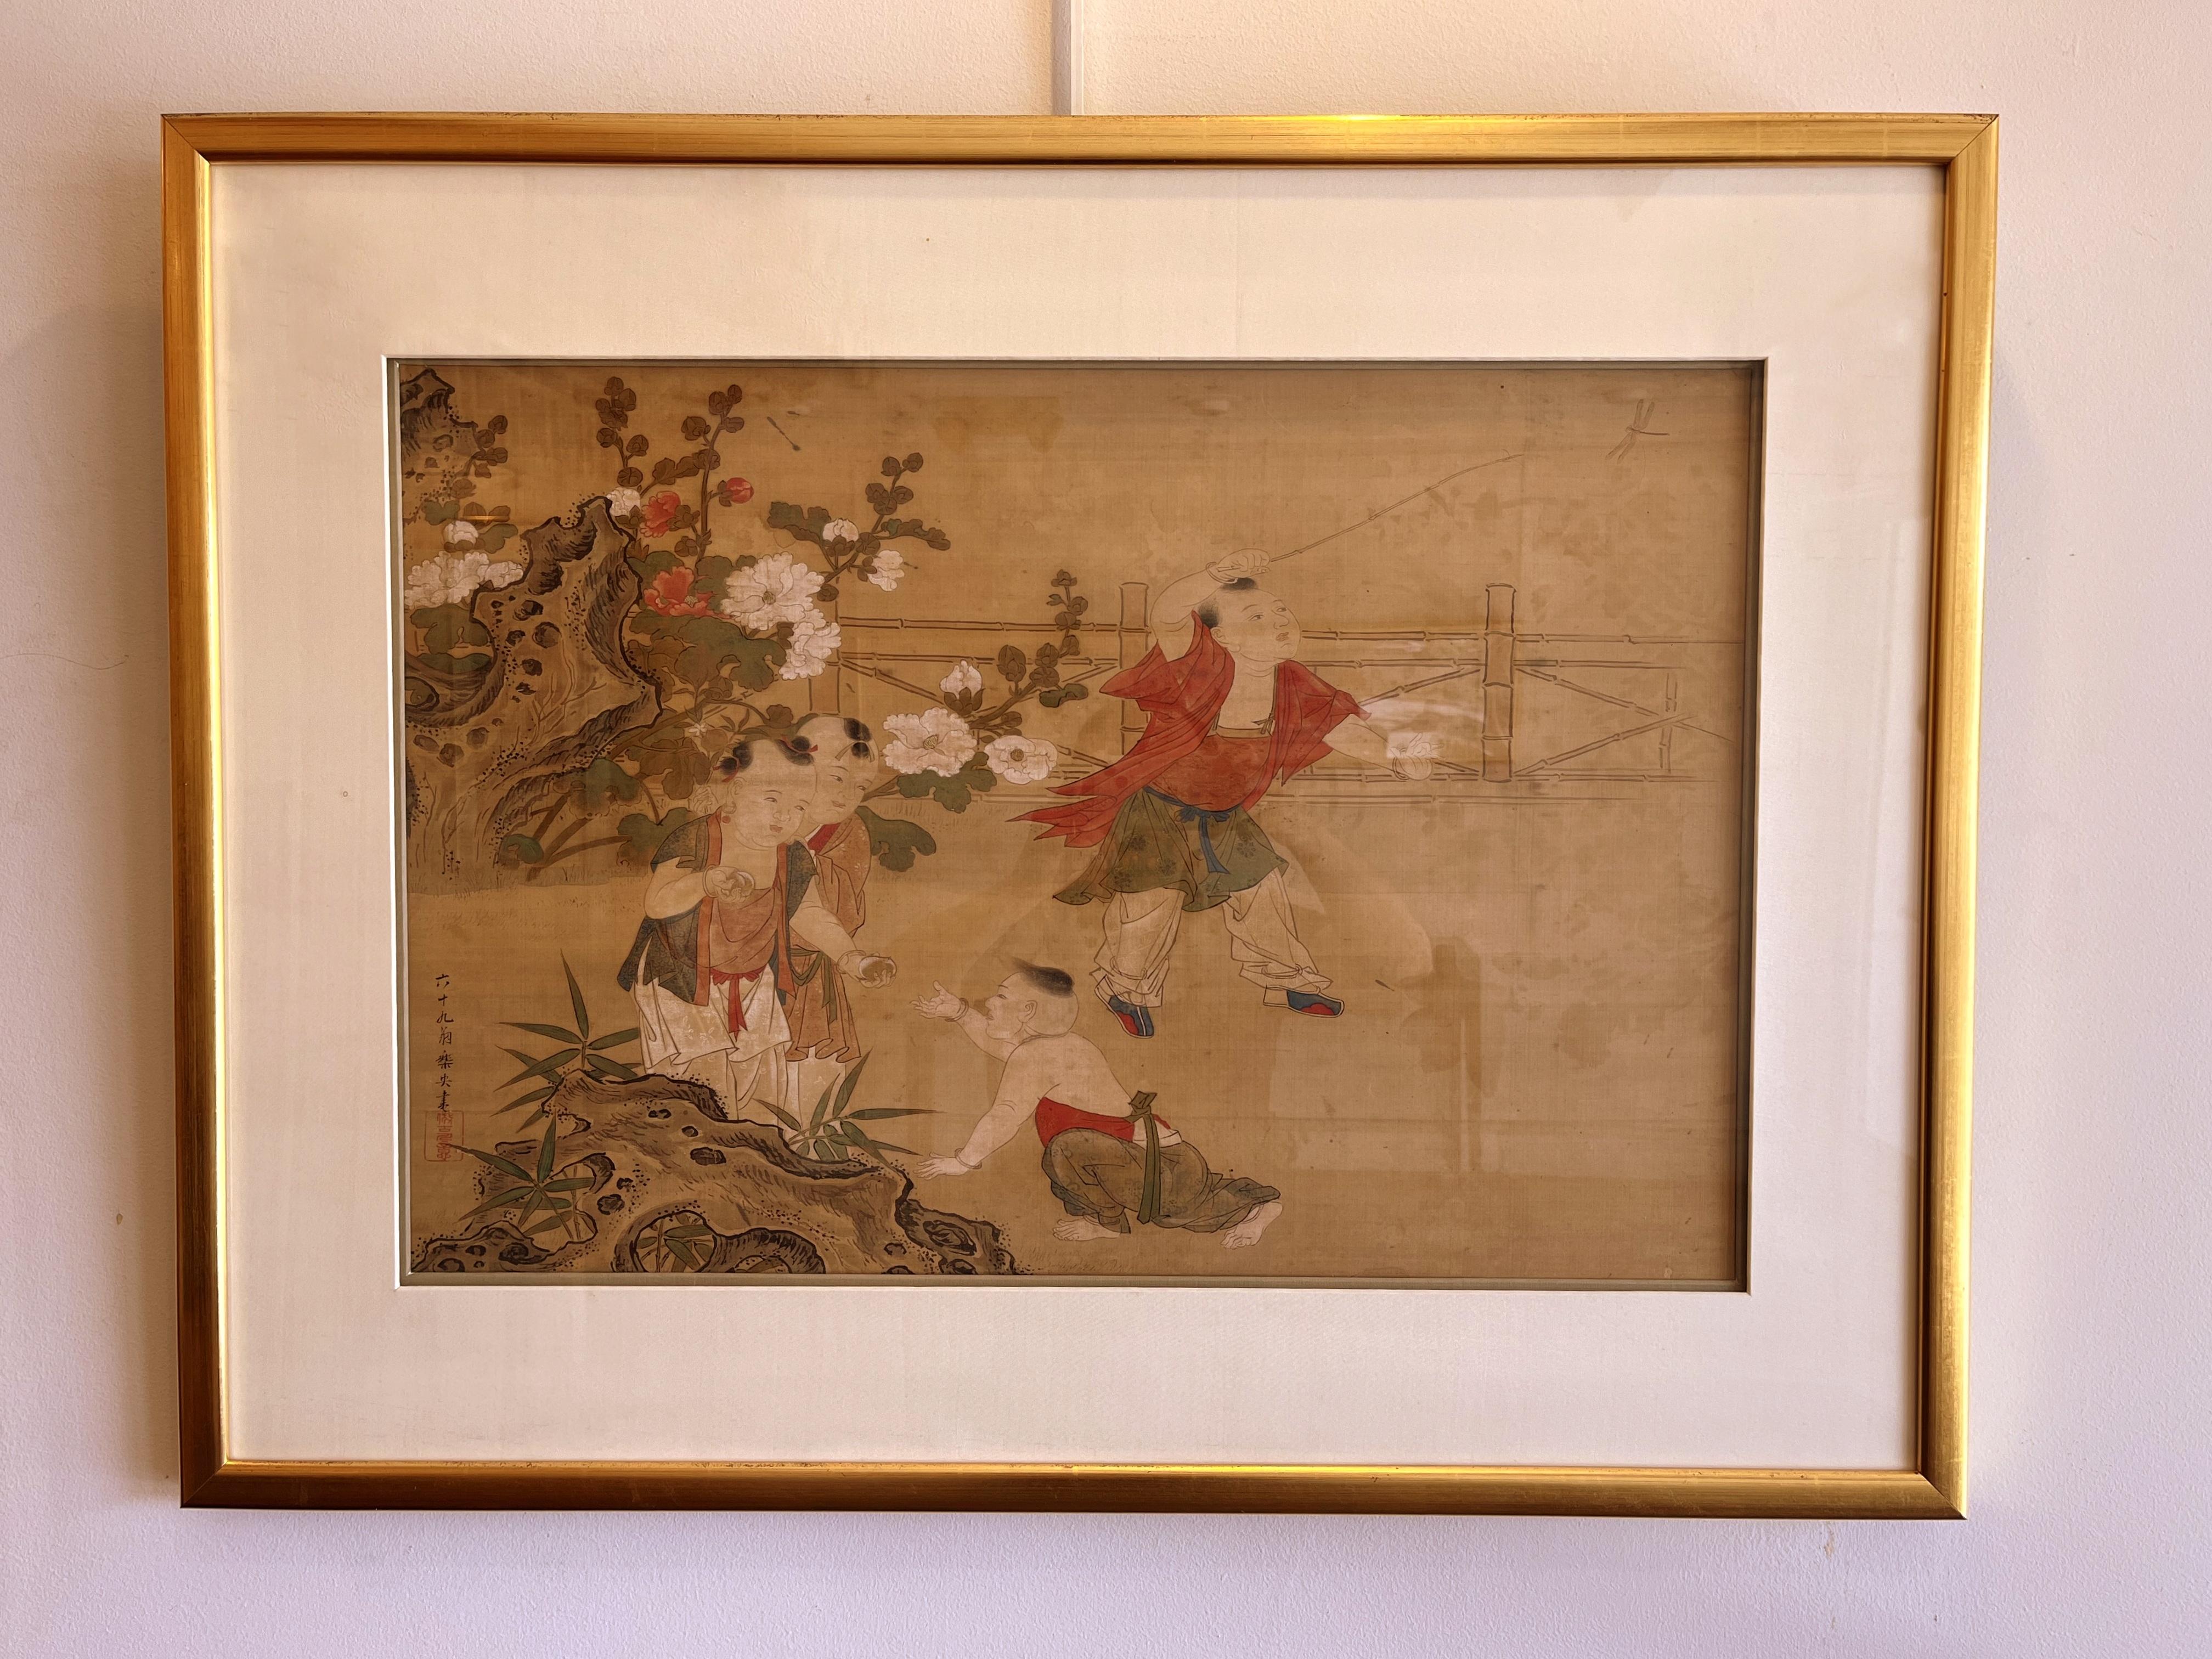  Fine Chinese brush painting of children playing in garden, ink and color on silk, 19th century, conservation framed